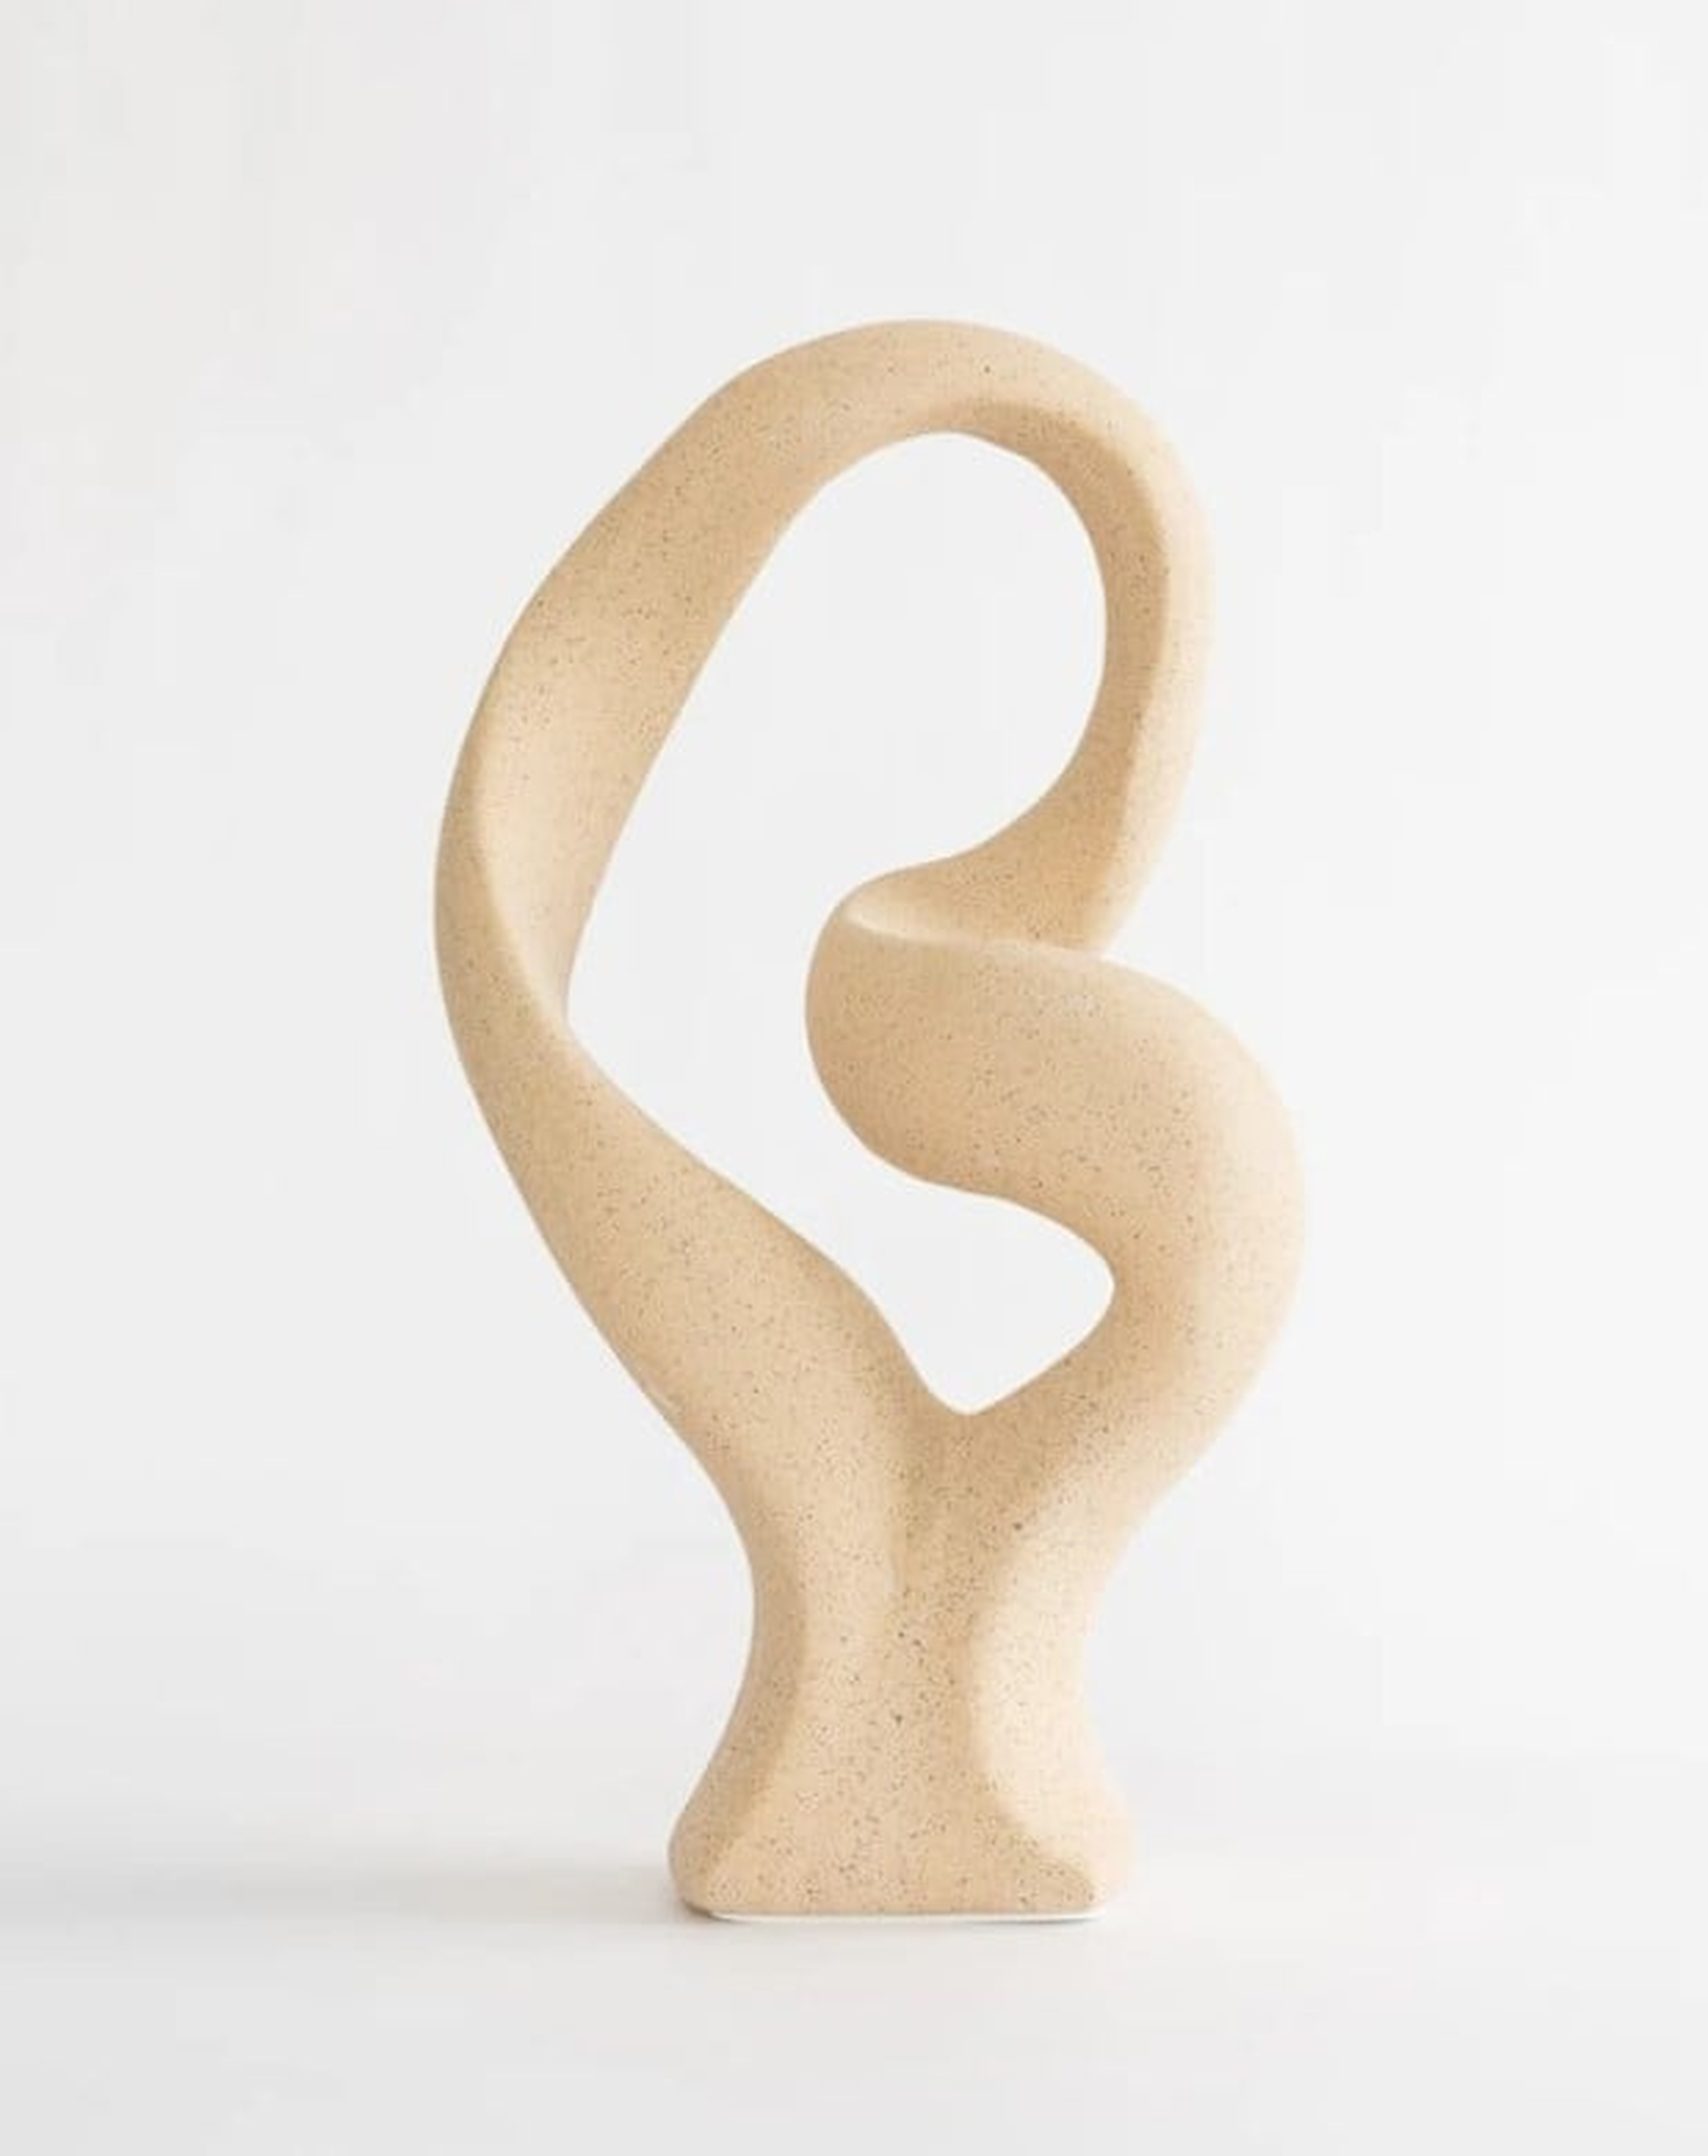 Stoneware Abstract Movement Object - McGee & Co.